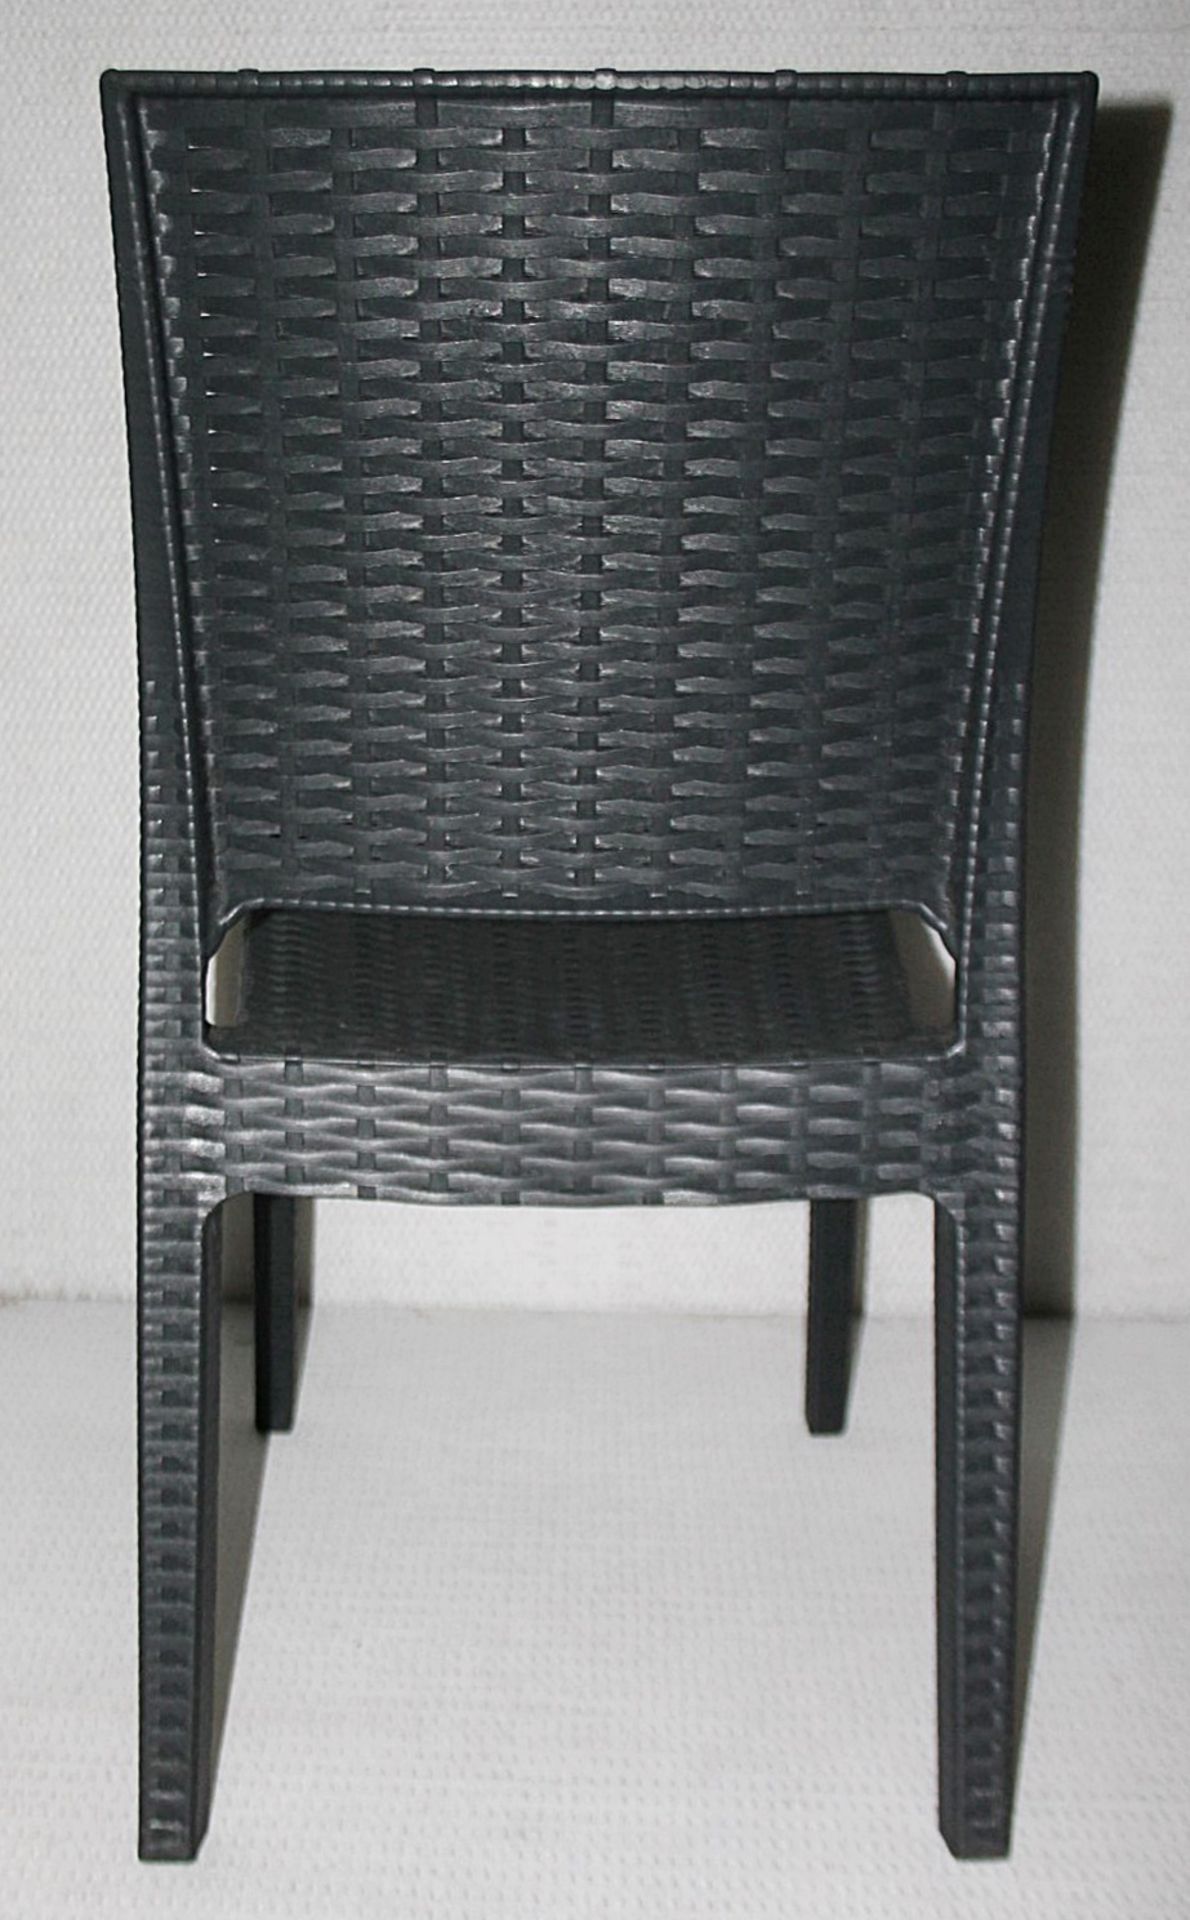 8 x SIESTA EXCLUSIVE 'Florida' Commercial Stackable Rattan-style Chairs In Dark Grey - Image 6 of 13